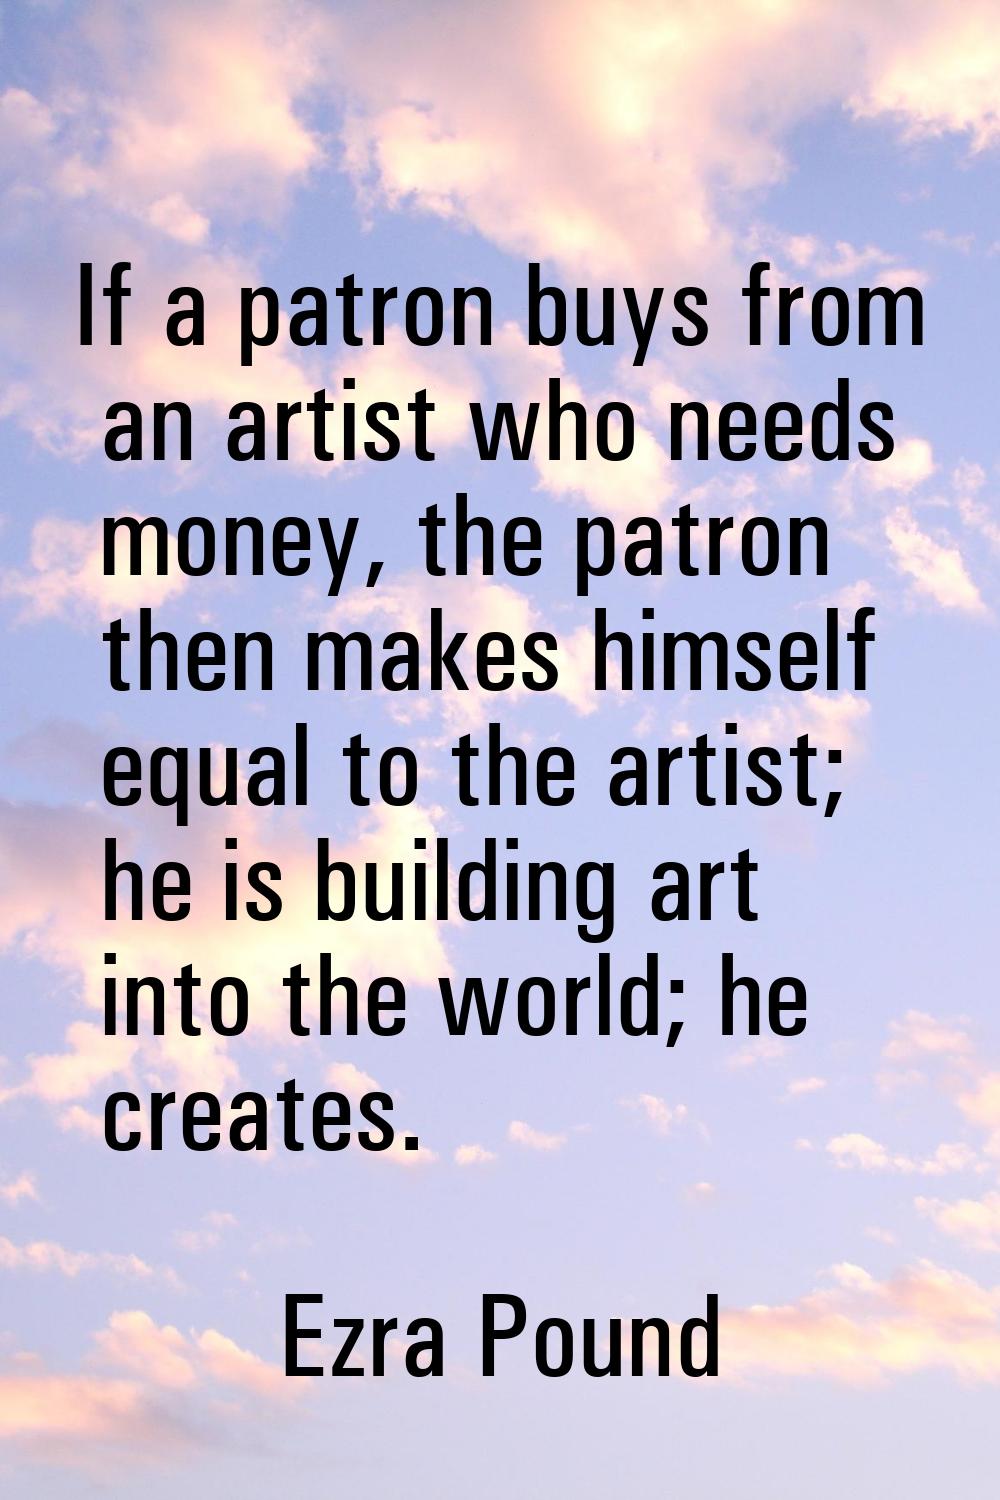 If a patron buys from an artist who needs money, the patron then makes himself equal to the artist;